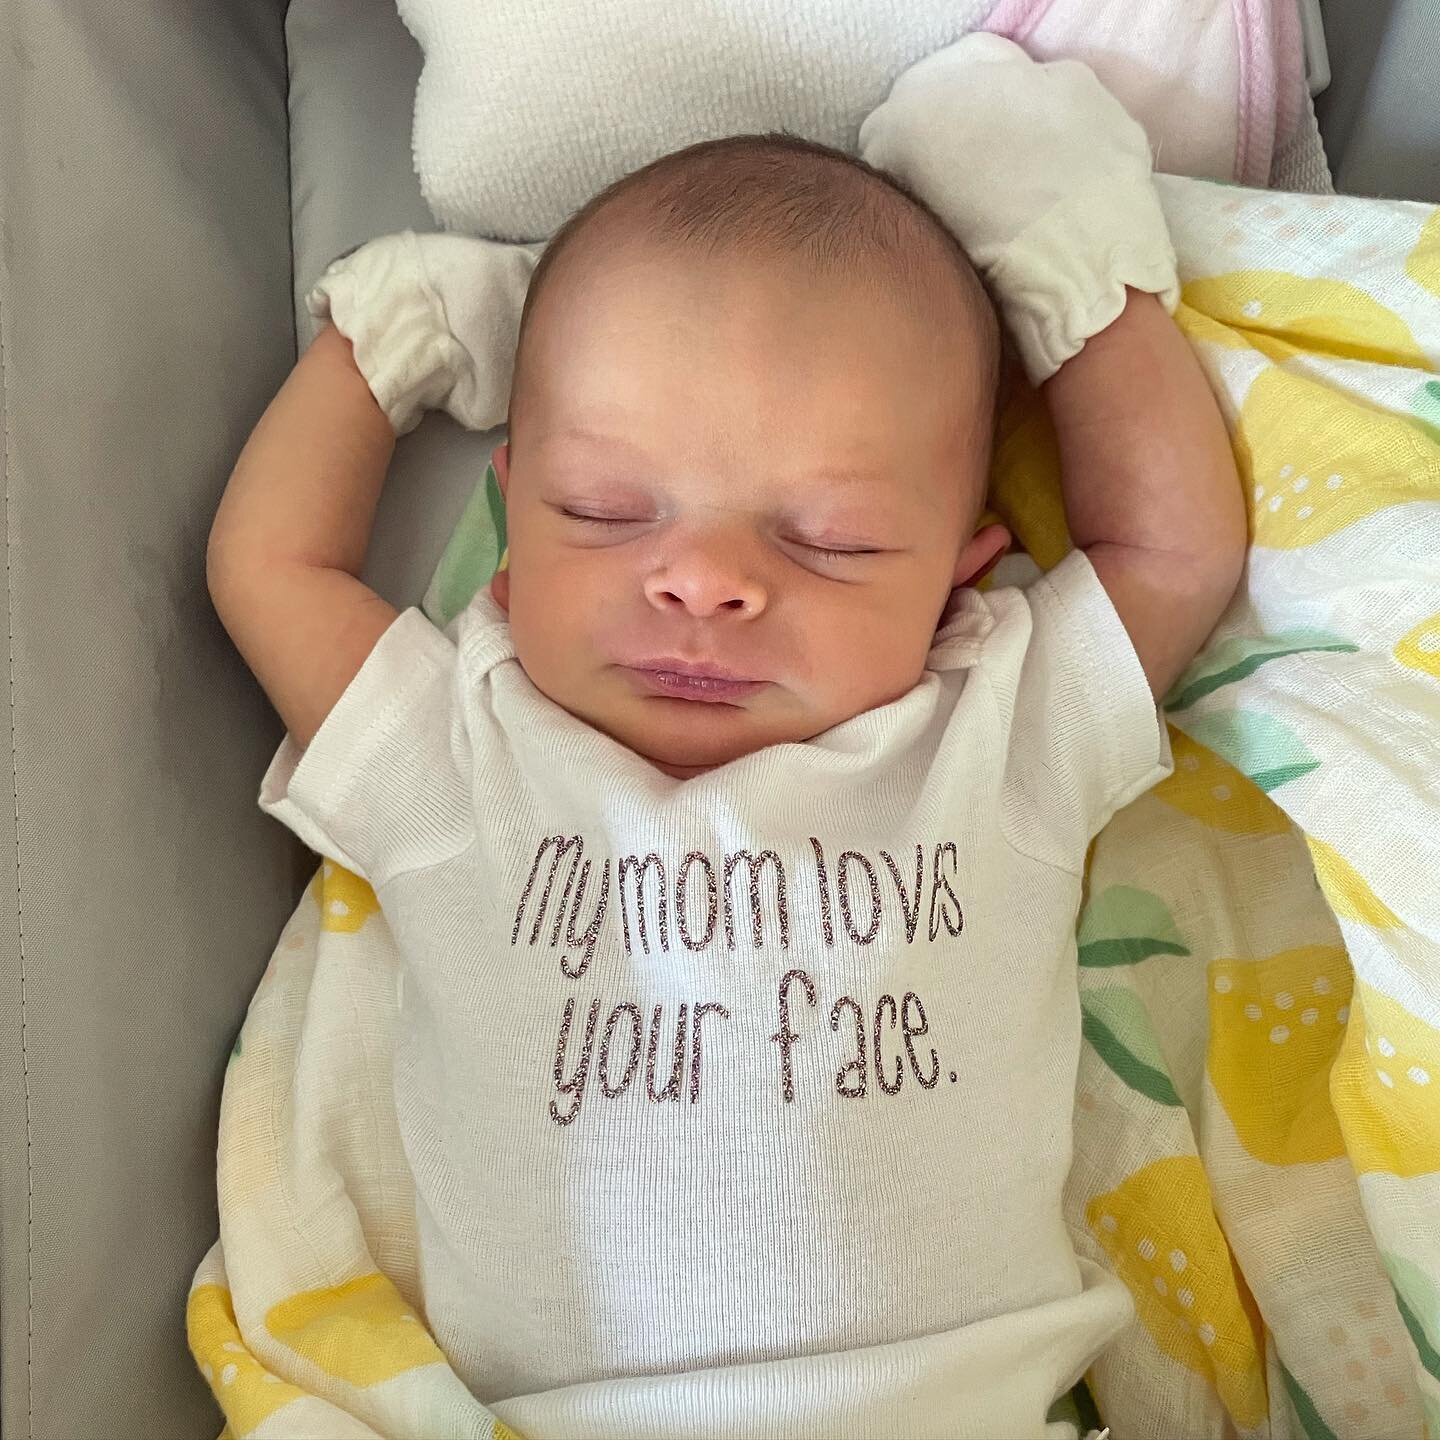 .. sweet Josephine &ldquo;Josie&rdquo; Marie made her way into the world on 5/12 weighing 5lbs 15oz! ❤️ just as a reminder, I am currently on maternity leave! Bare with me as it may take a couple days to respond to your messages! Don&rsquo;t hesitate